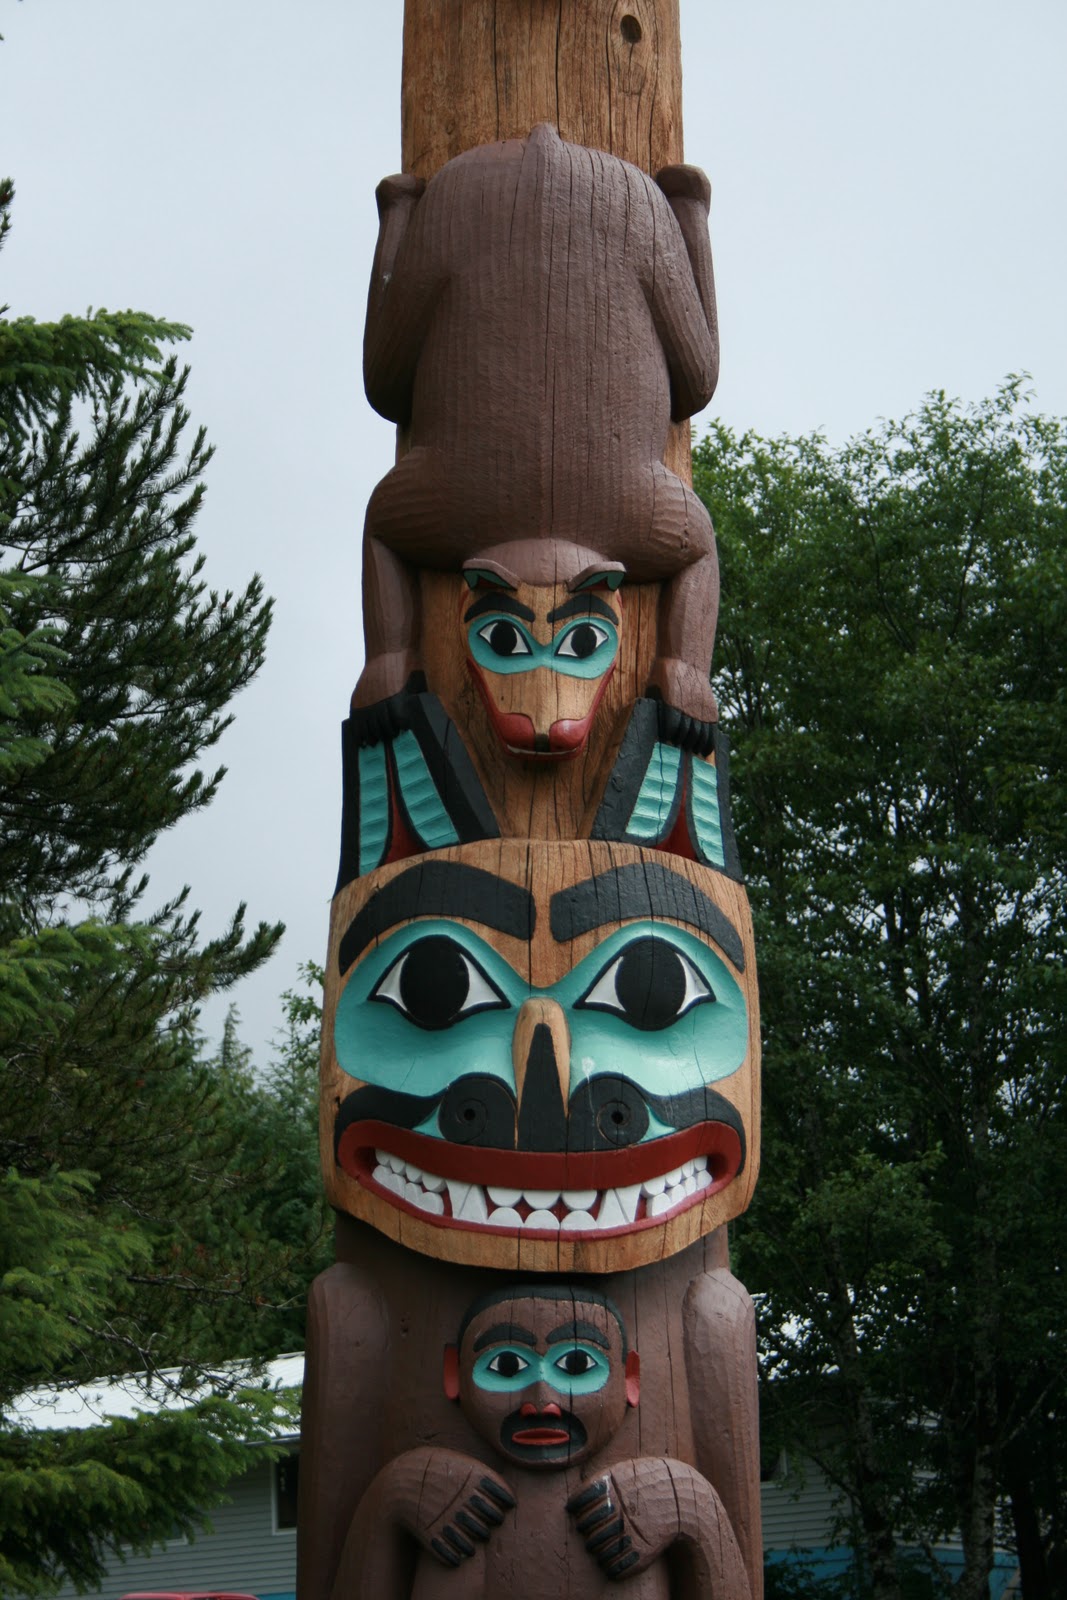 ArtSourced: Totem Poles and Other Alaskan Art, Part 2